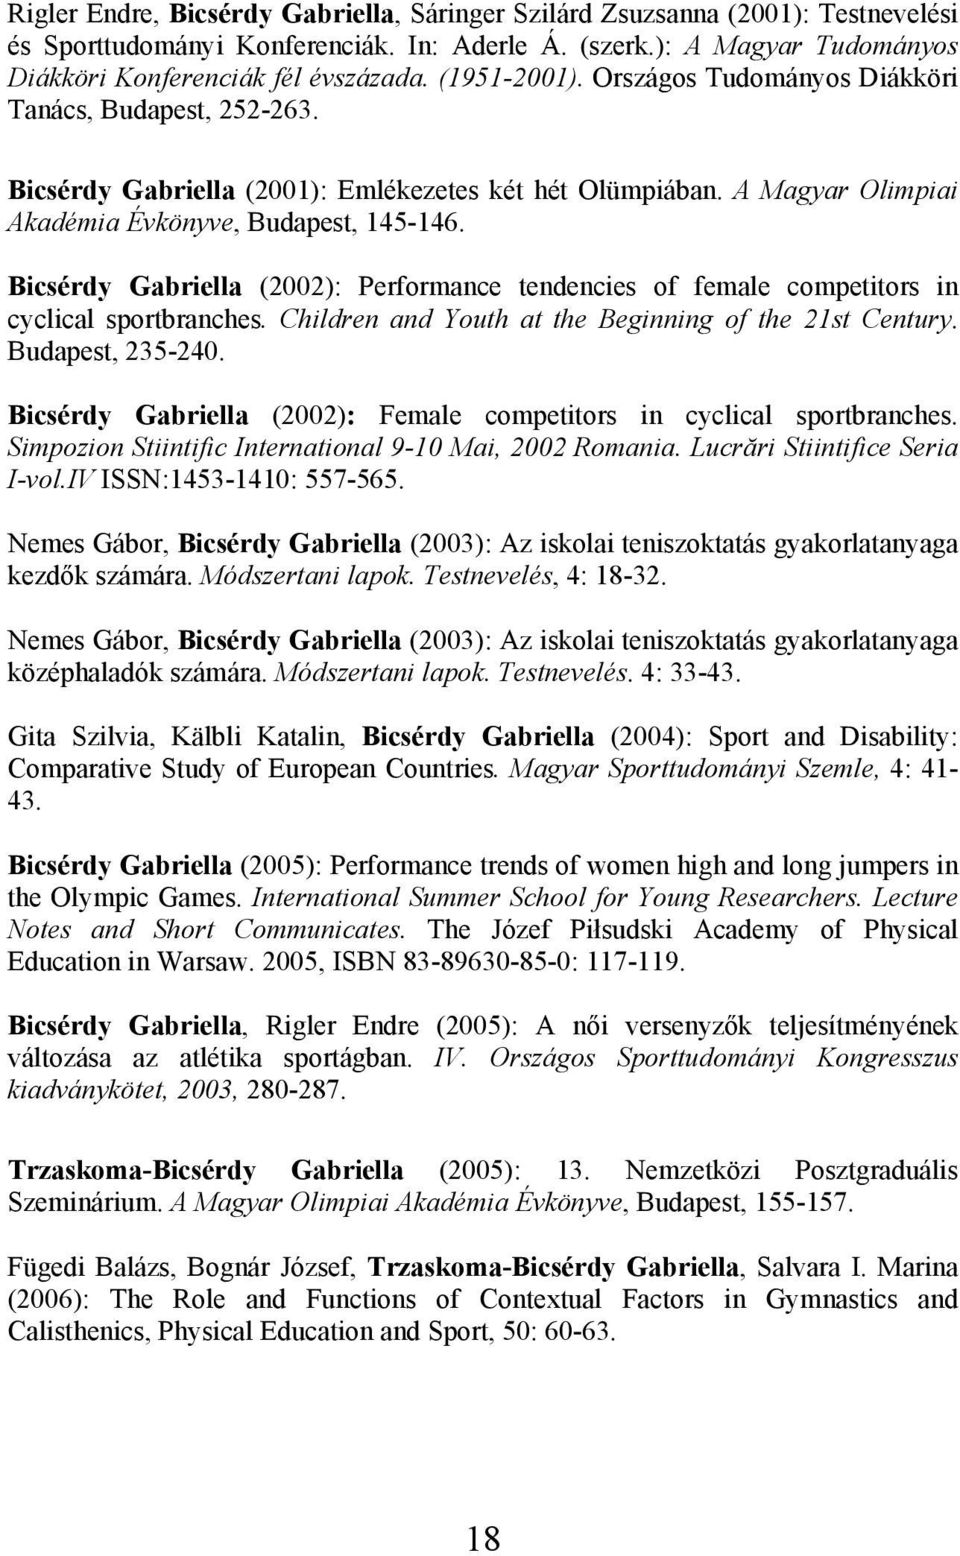 Bicsérdy Gabriella (2002): Performance tendencies of female competitors in cyclical sportbranches. Children and Youth at the Beginning of the 21st Century. Budapest, 235-240.